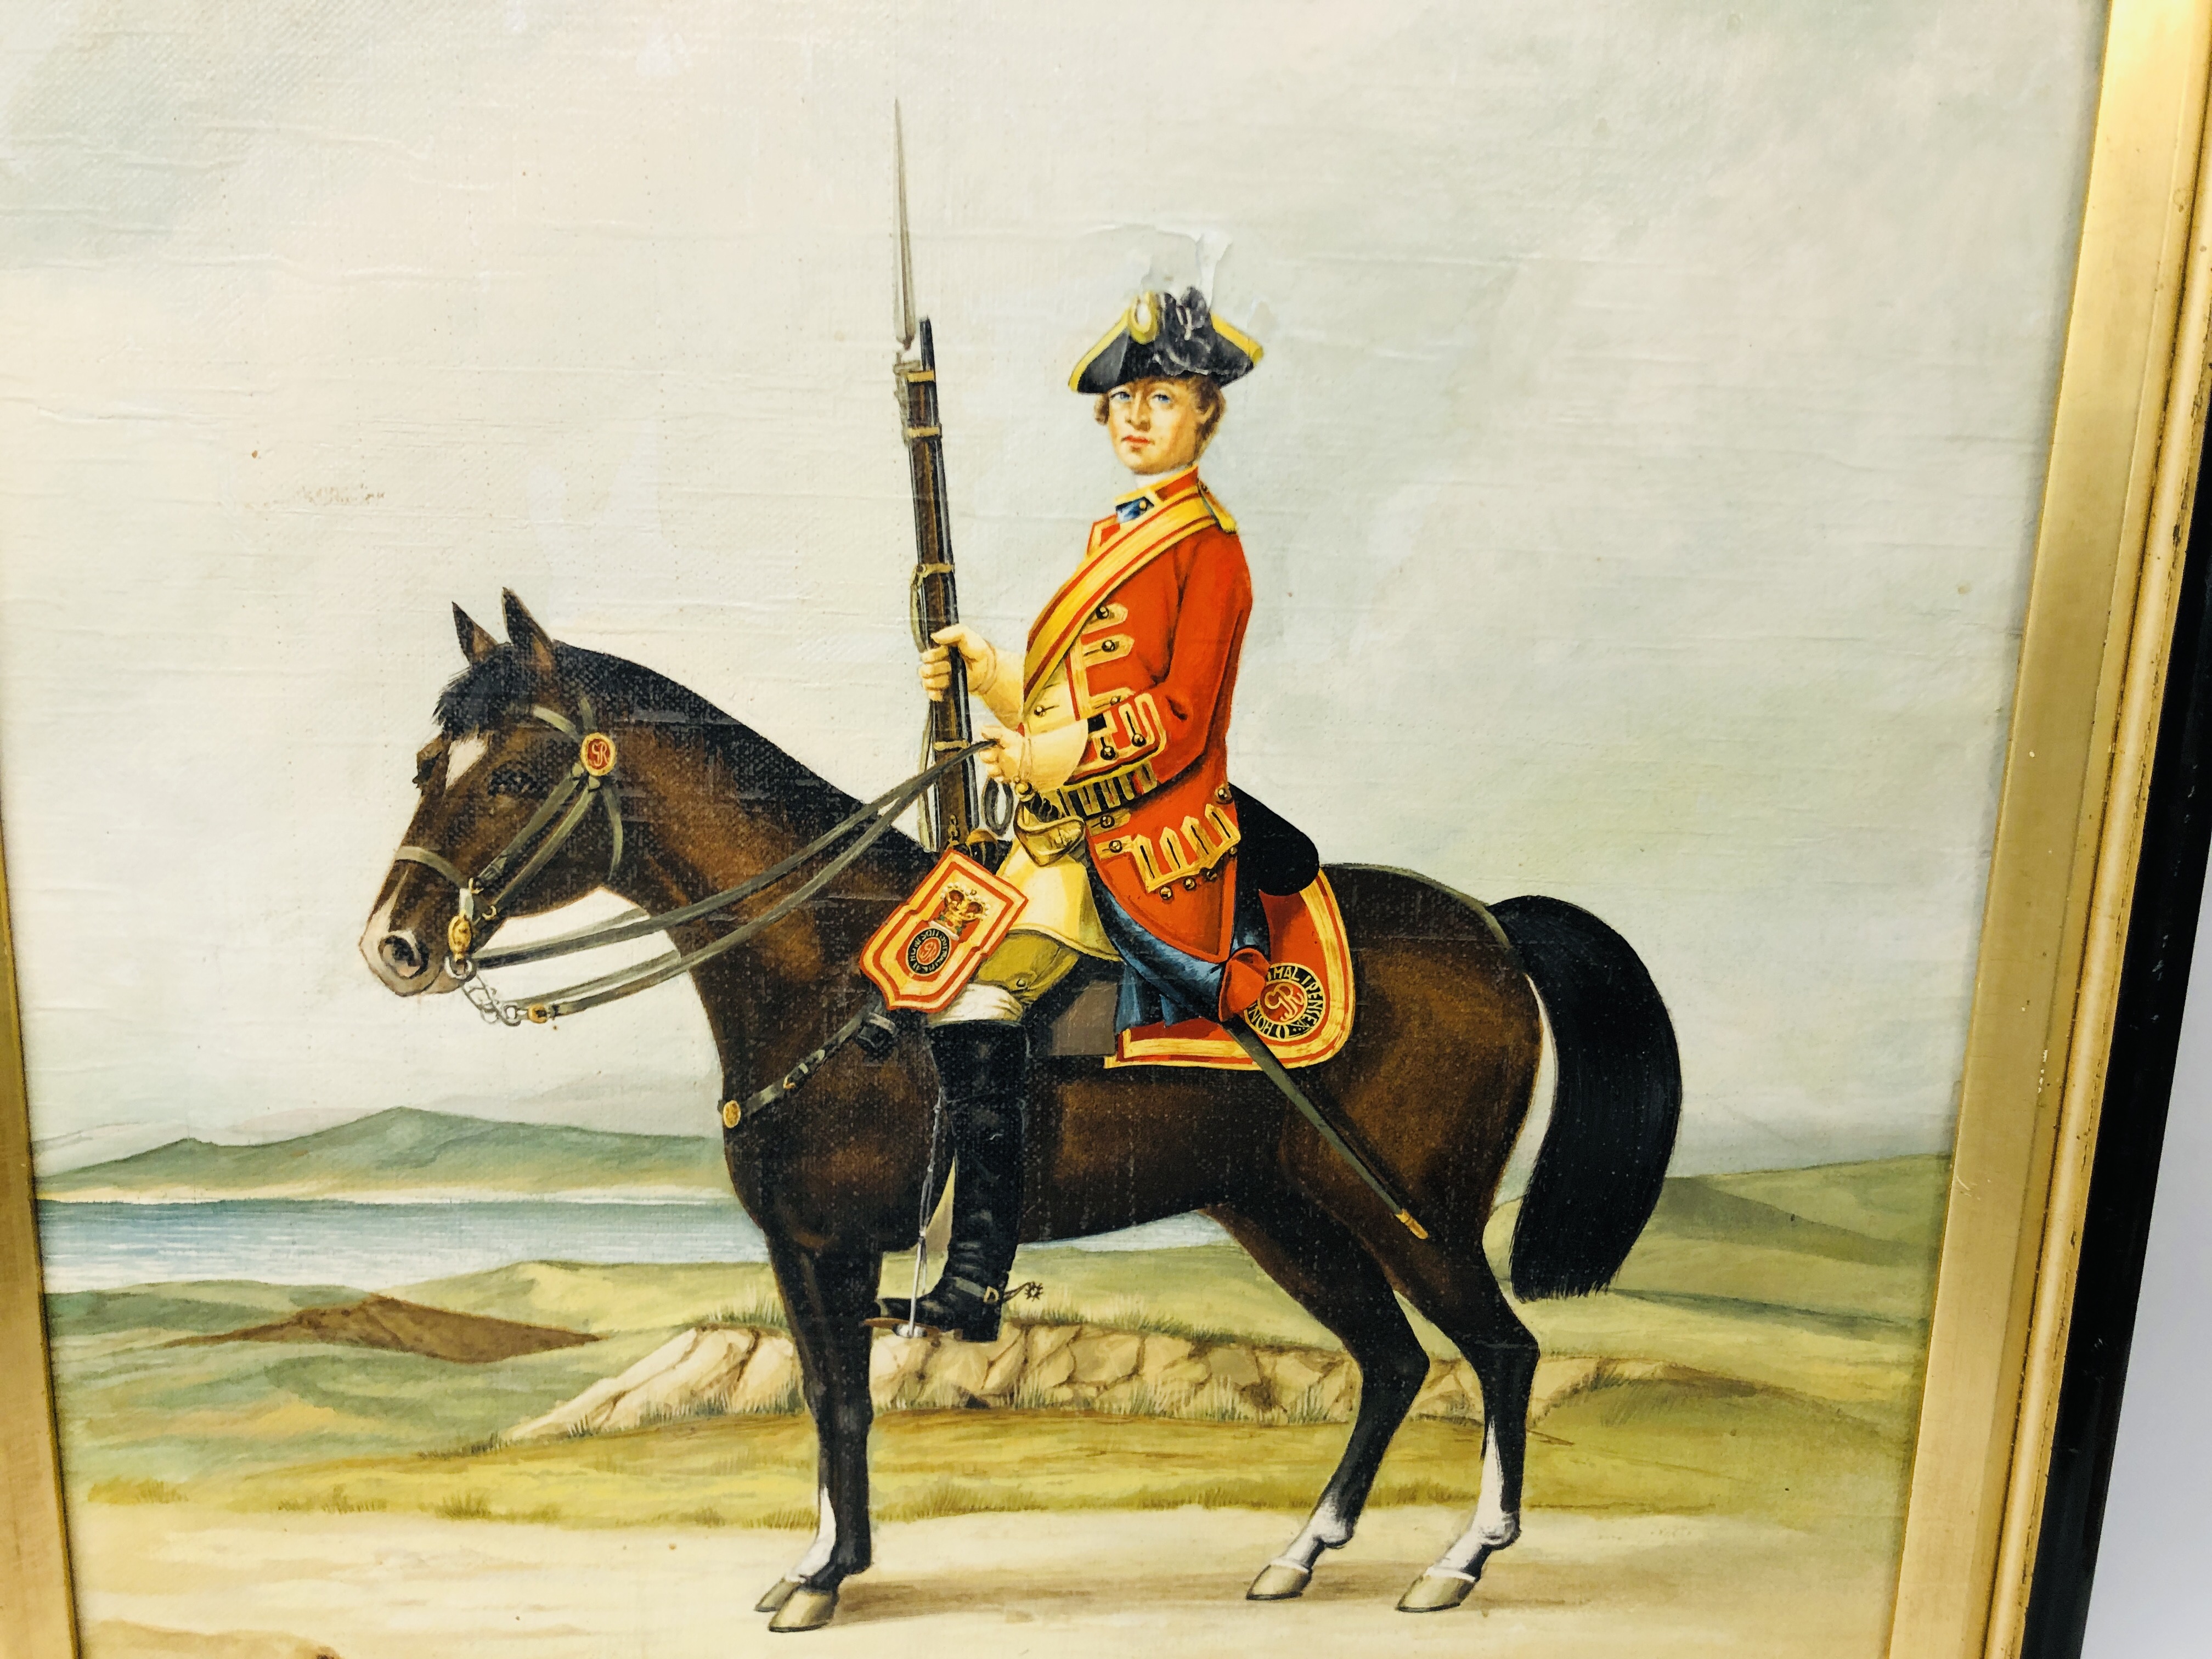 FRAMED OIL ON CANVAS, HORSE GUARDS 1751 BEARING SIGNATURE DARLEY DATED 76 - W 50CM. H 56CM. - Image 2 of 5